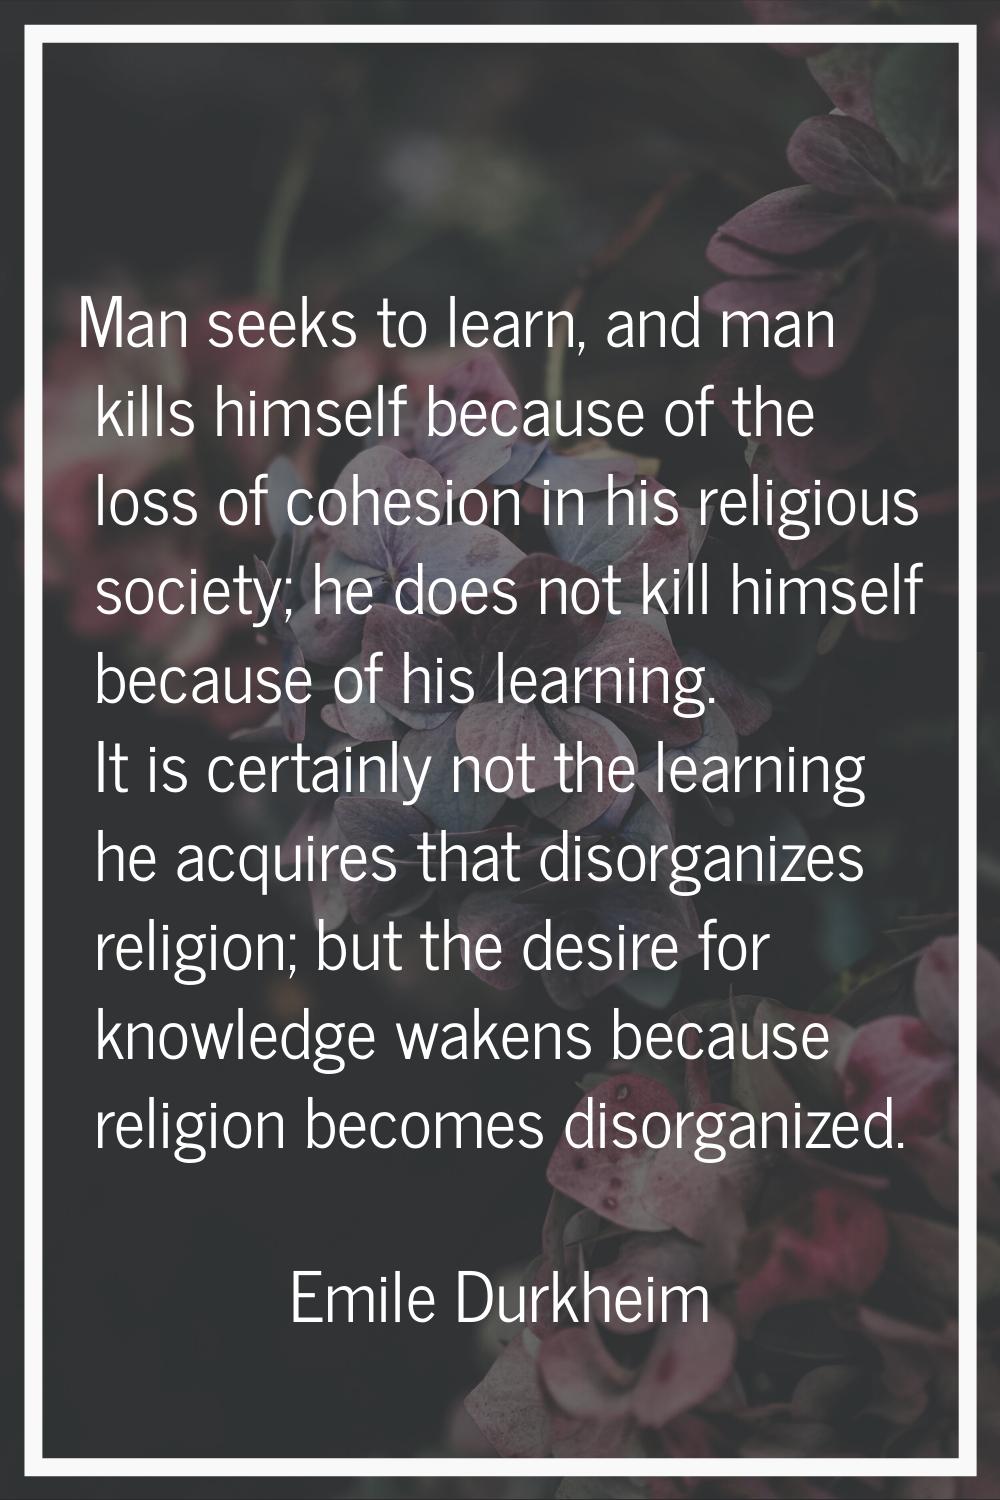 Man seeks to learn, and man kills himself because of the loss of cohesion in his religious society;